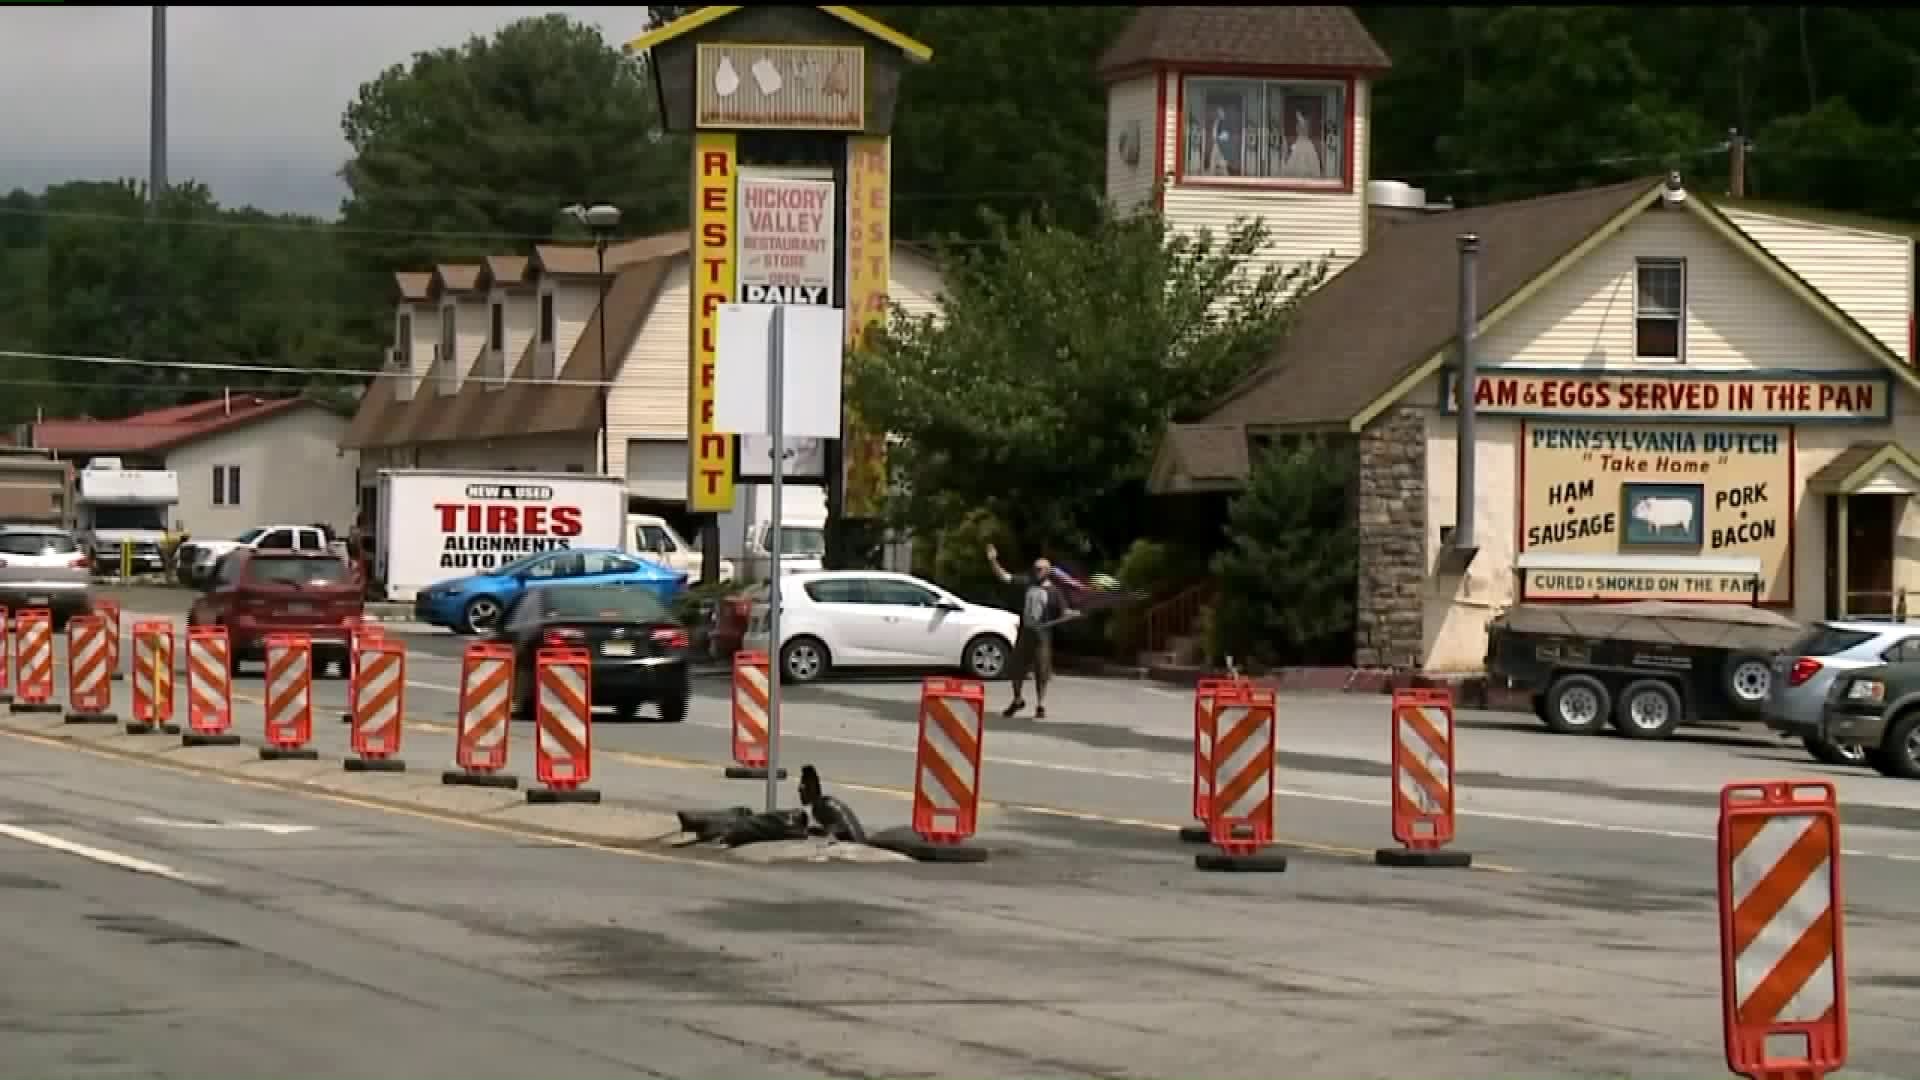 Roadwork on Route 611 Taking Toll on Businesses in the Poconos